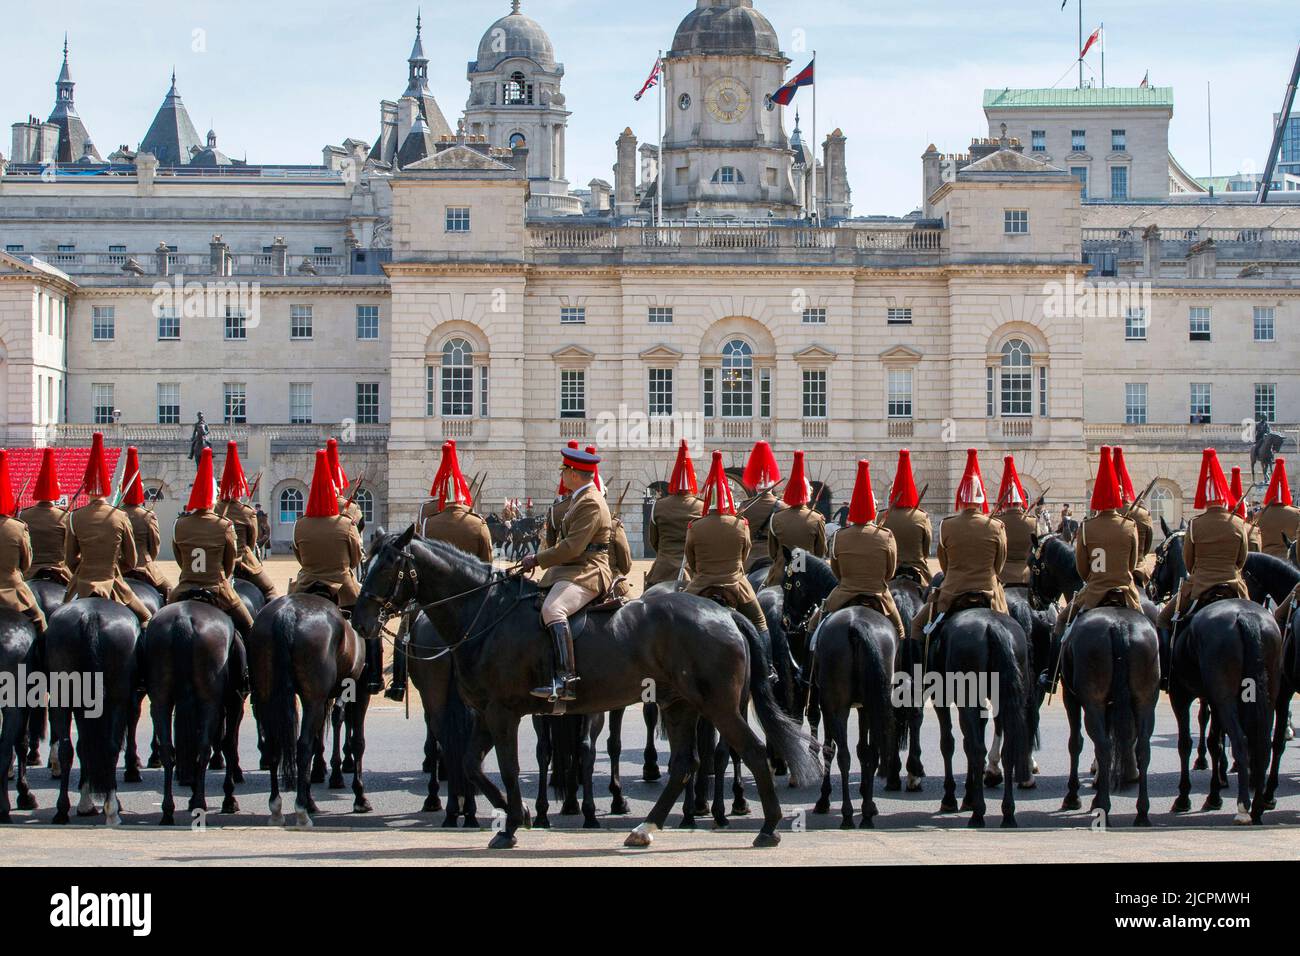 Queens Household Cavalry riding horses on Horseguards Parade rehearsing for Trooping the Colour in London, England, United Kingdom Stock Photo